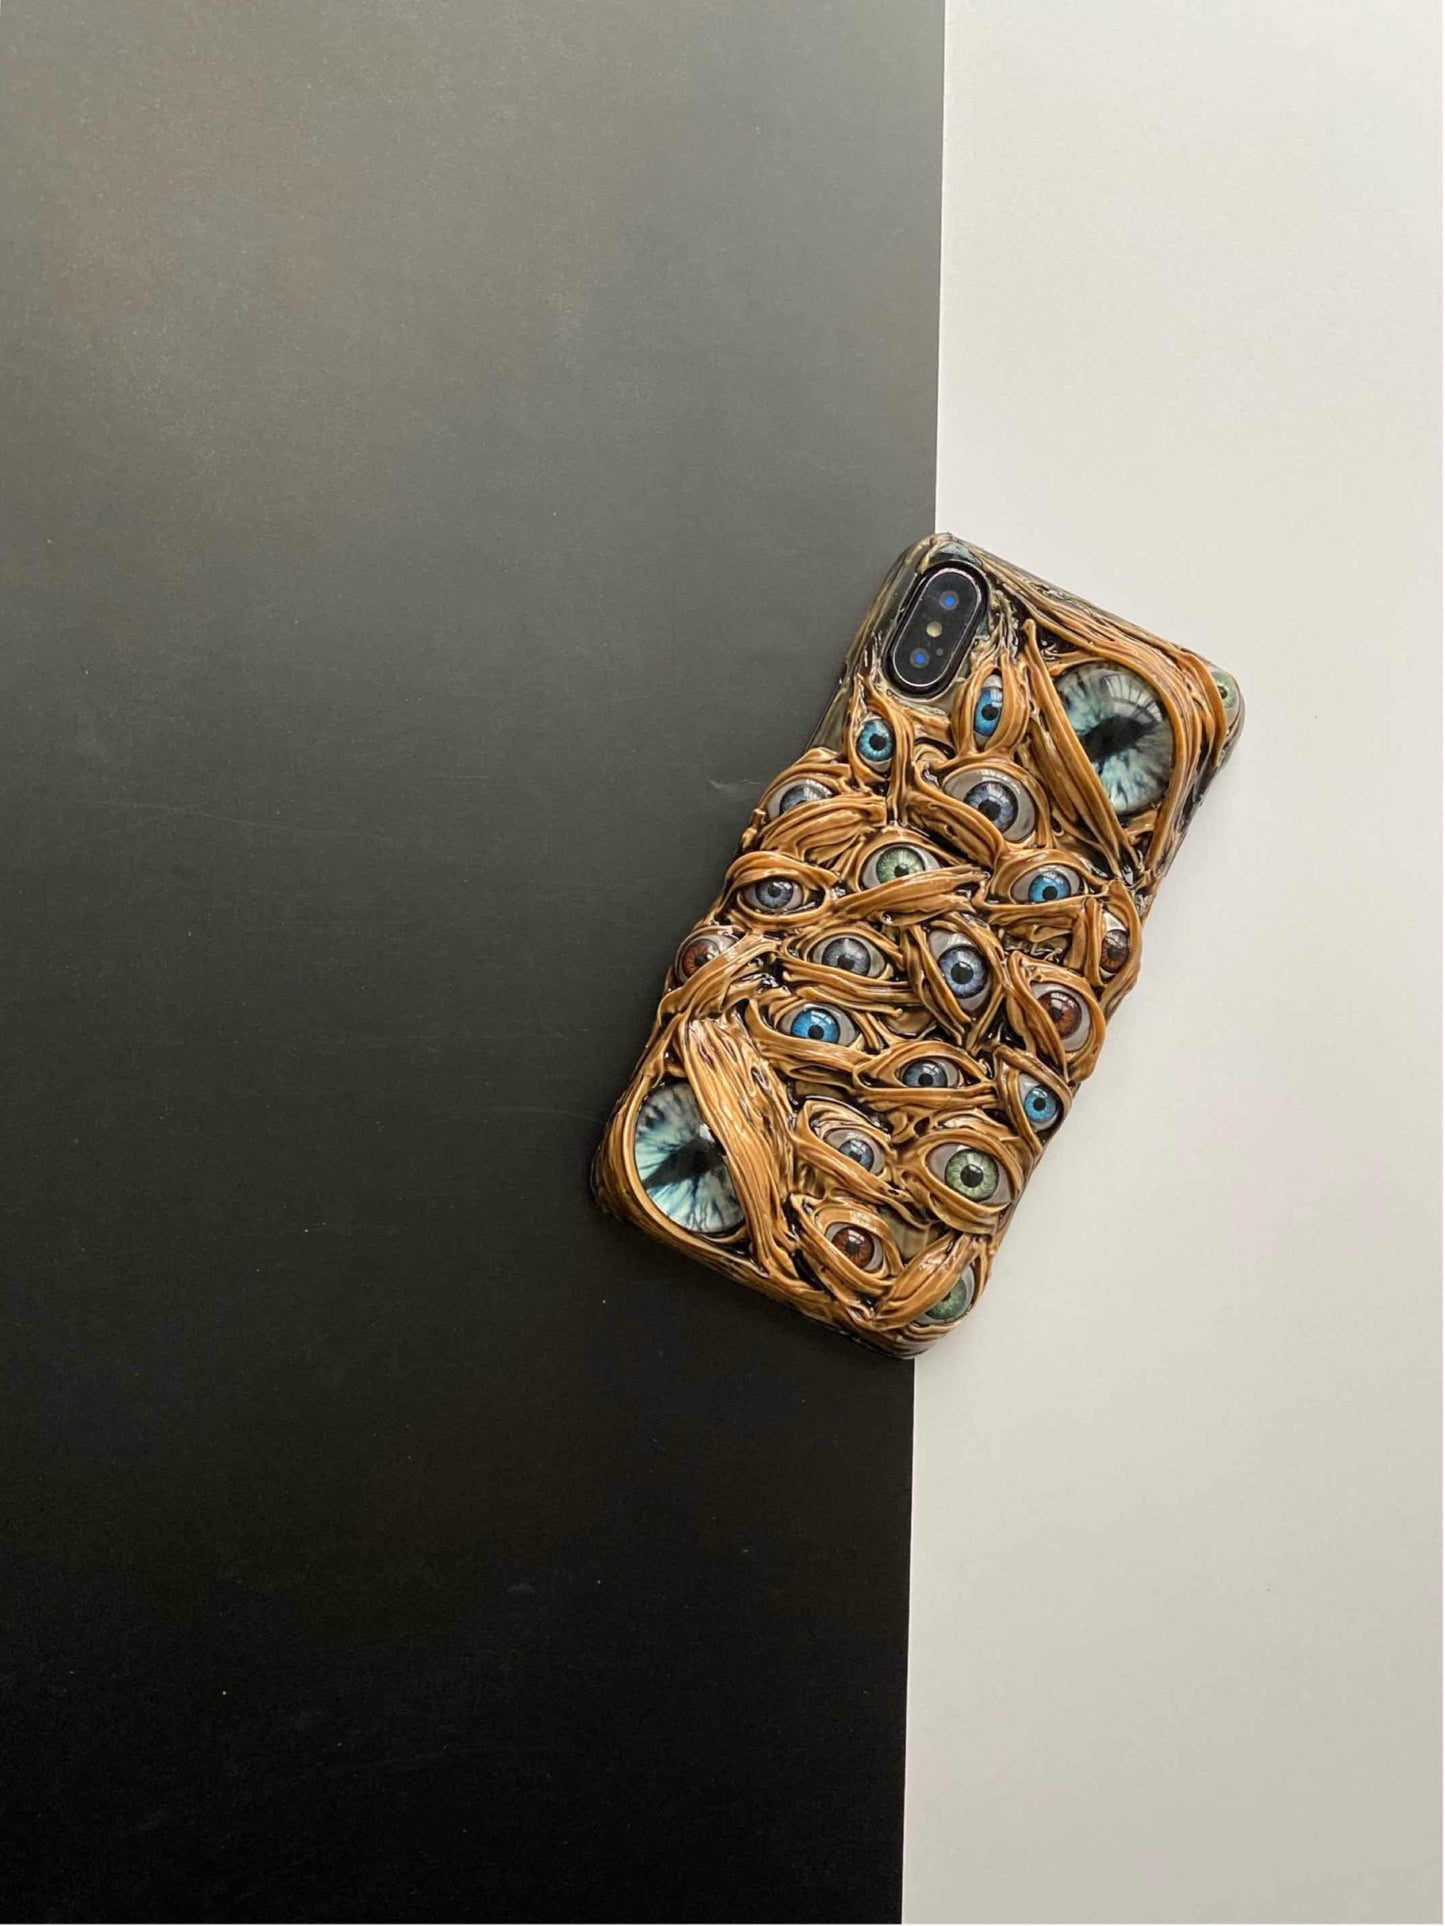 Techypop iPhone Case iPhone 12 Mini The Monster Eyes Handmade Designer iPhone Case For iPhone 12 SE 11 Pro Max X XS Max XR 7 8 Plus